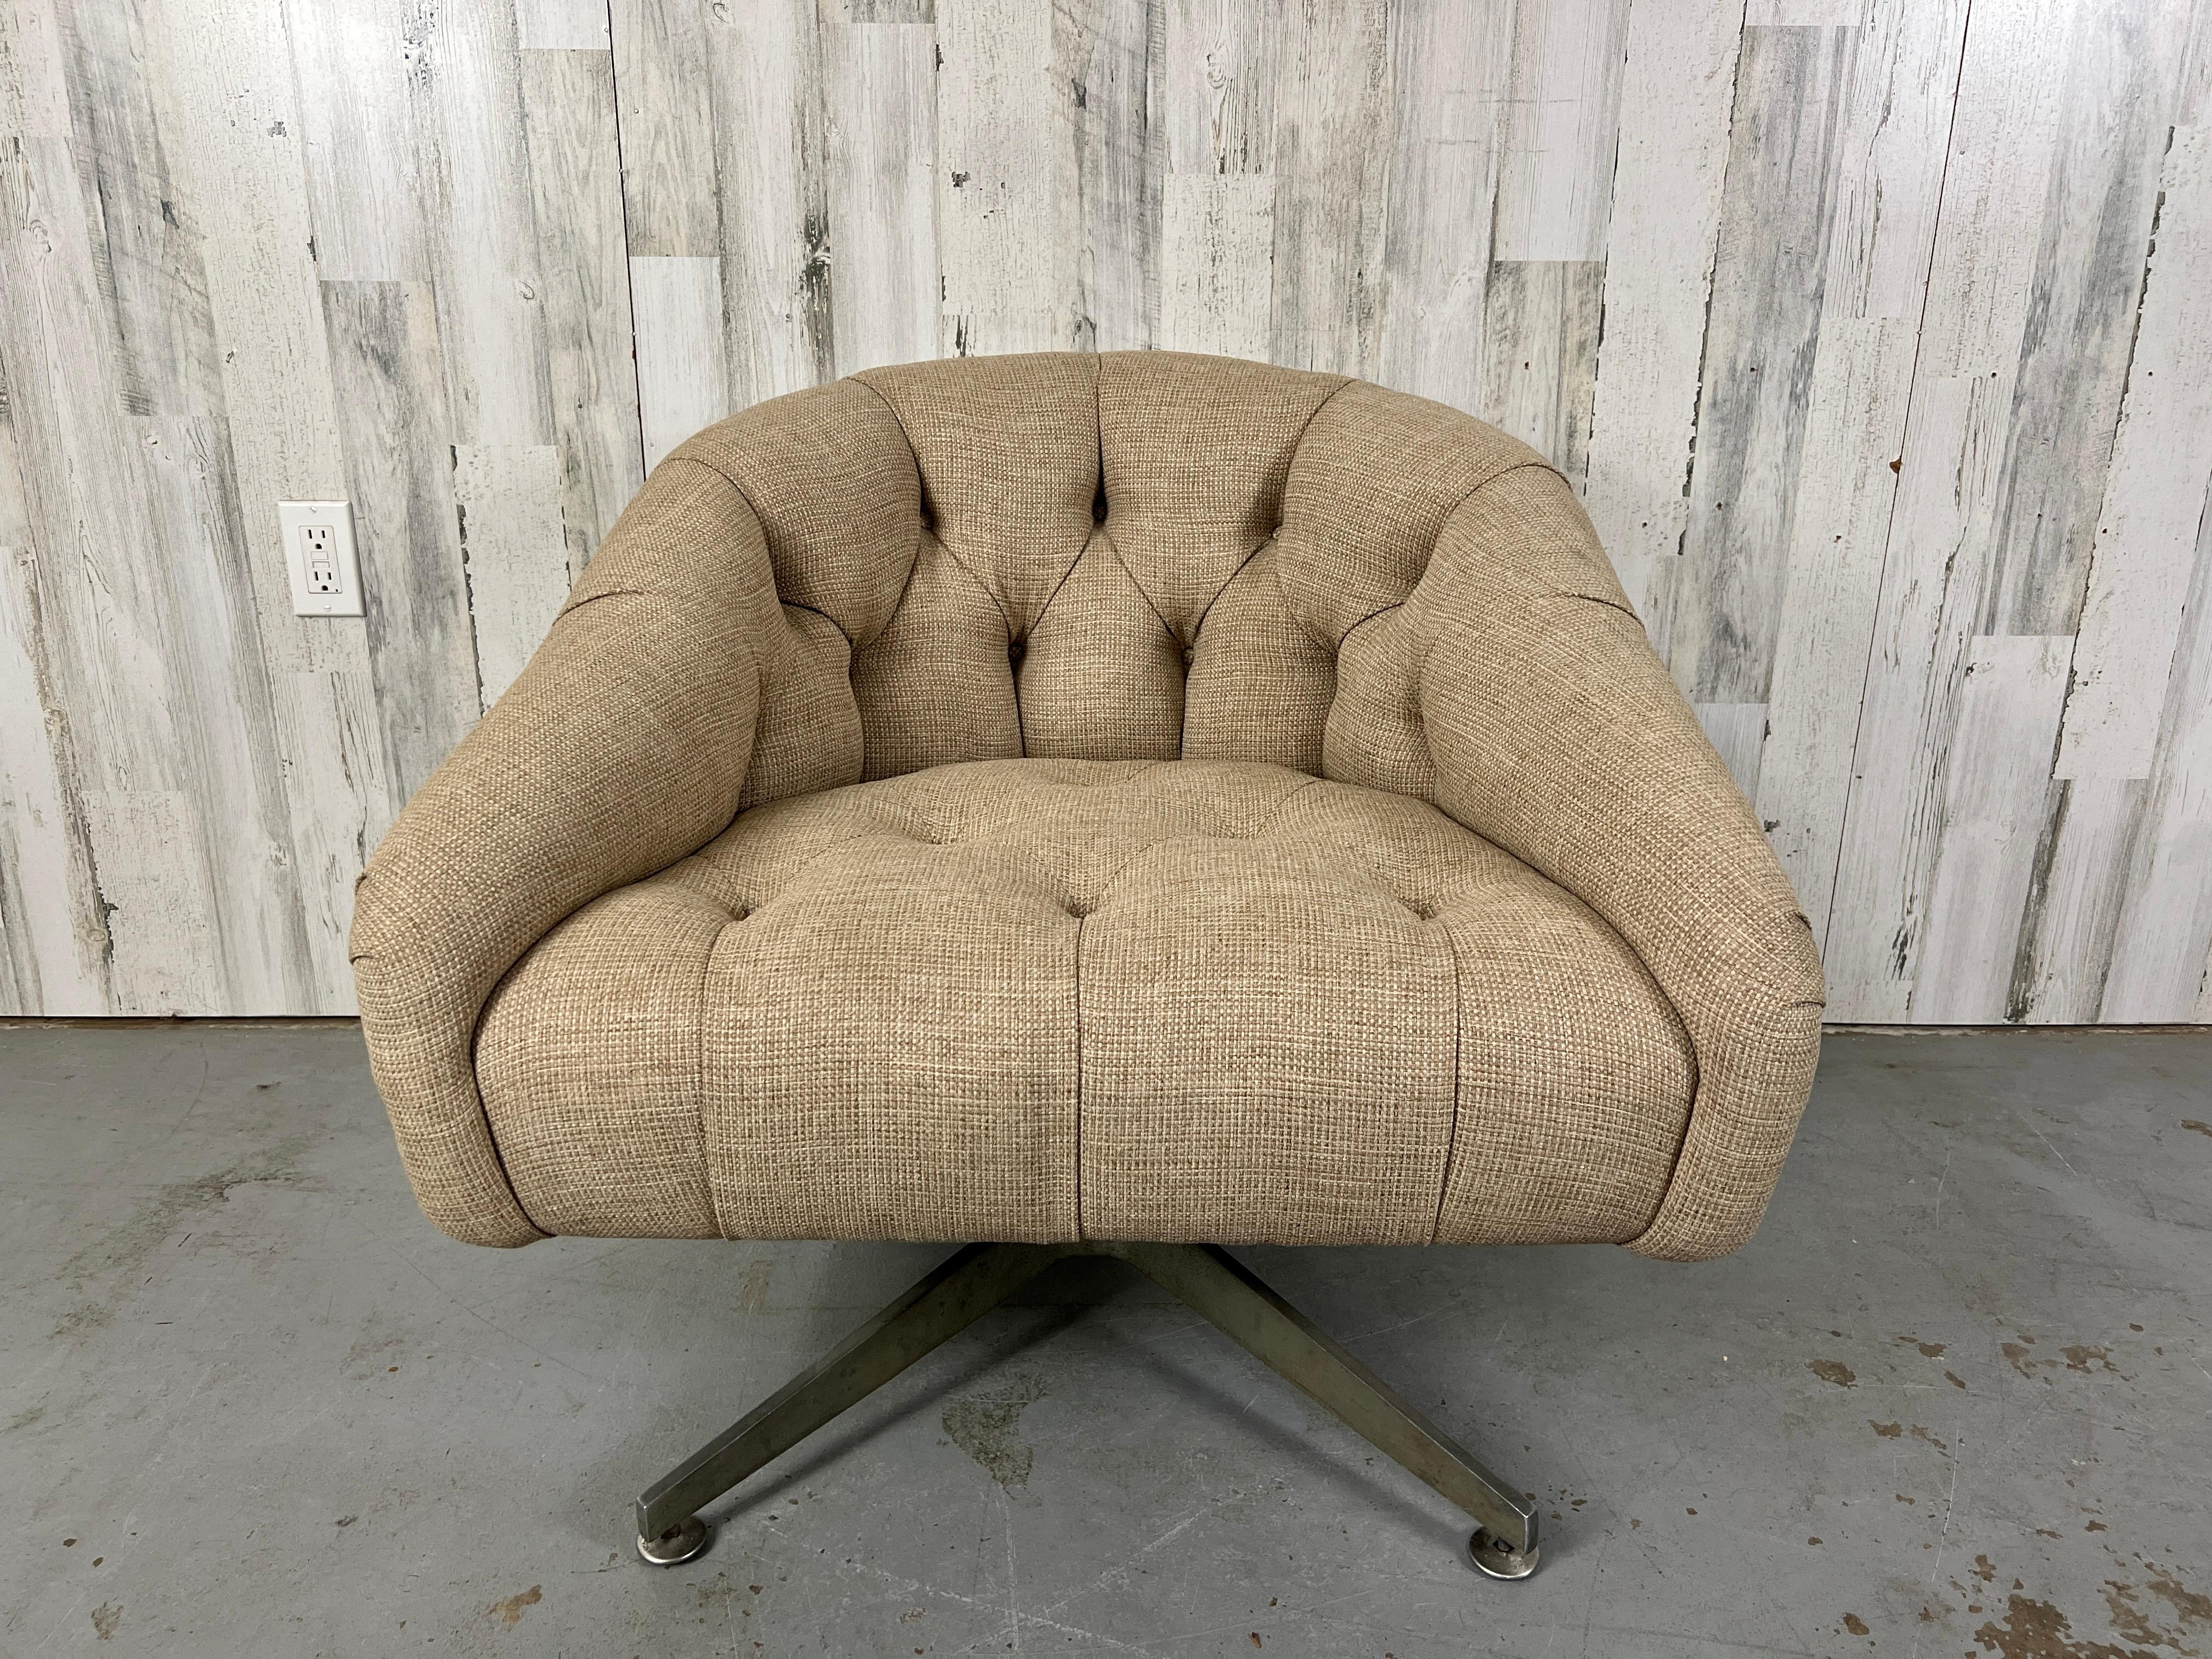 Swivel tufted lounge chair by Ward Bennett for Lehigh Leopold.